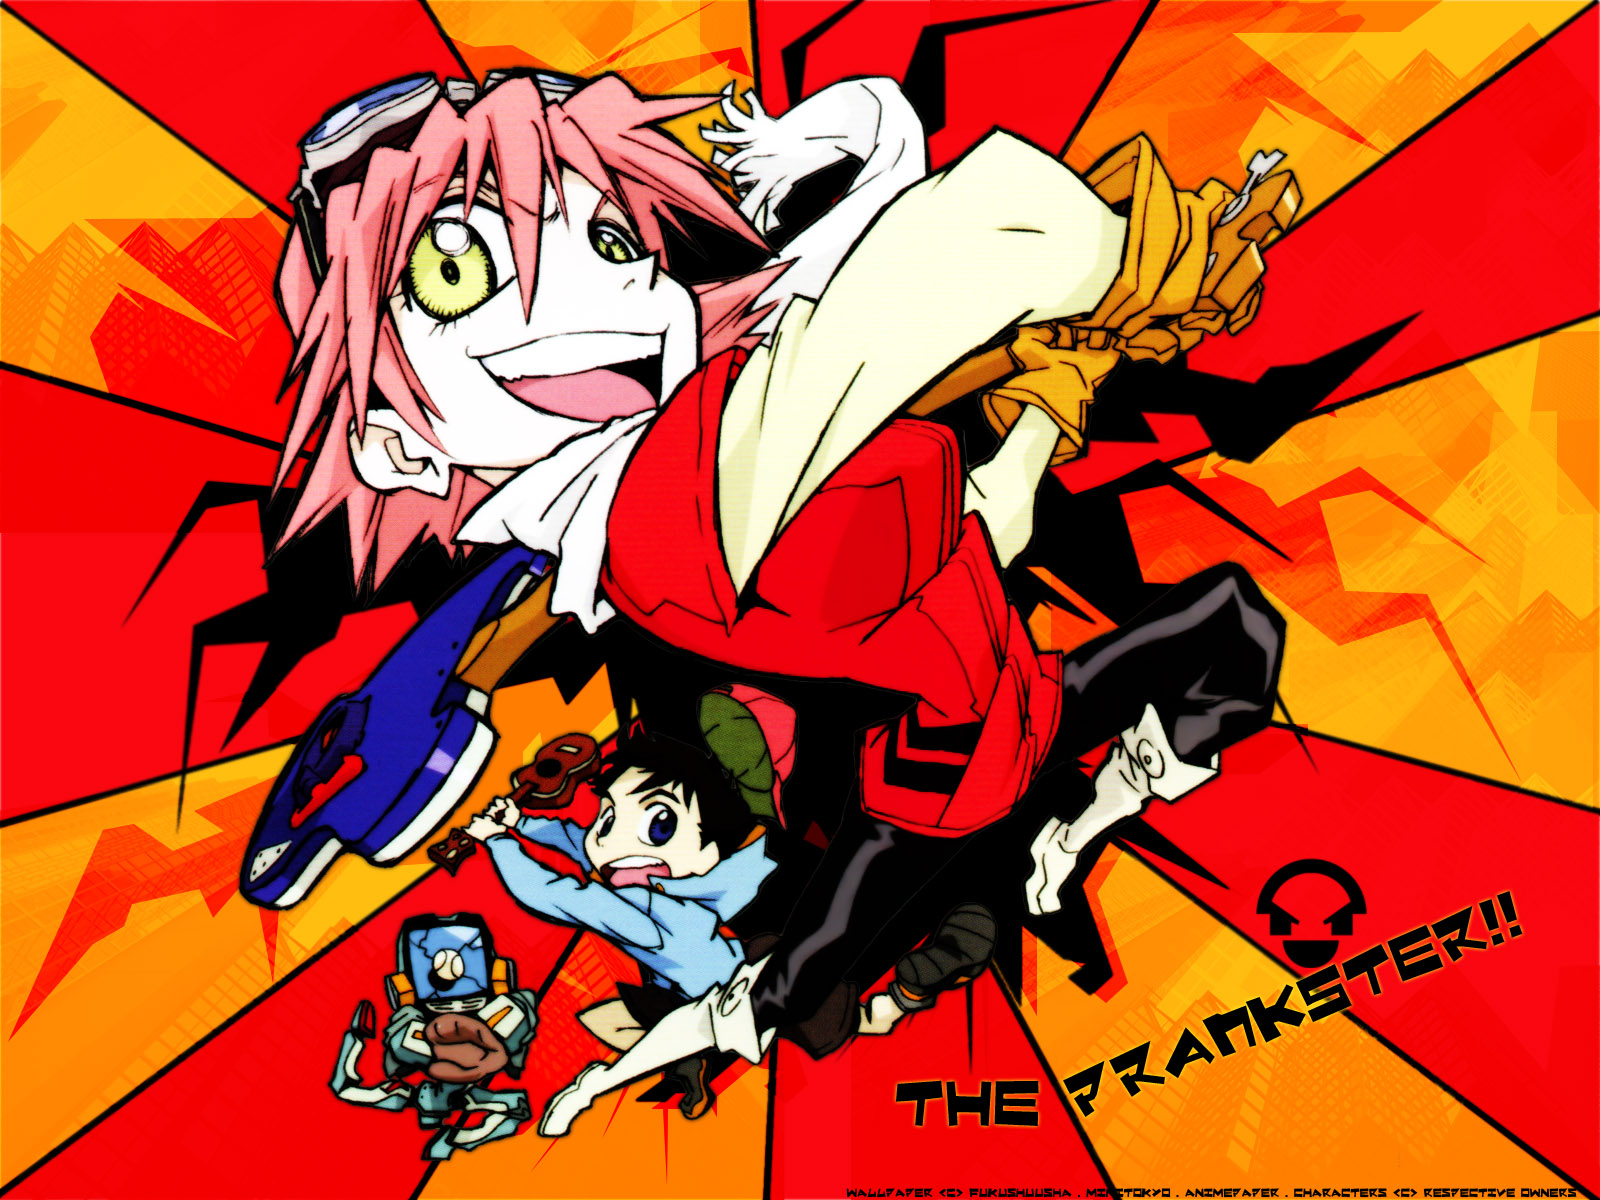 Flcl Fooly Cooly HD Wallpaper Anime Manga